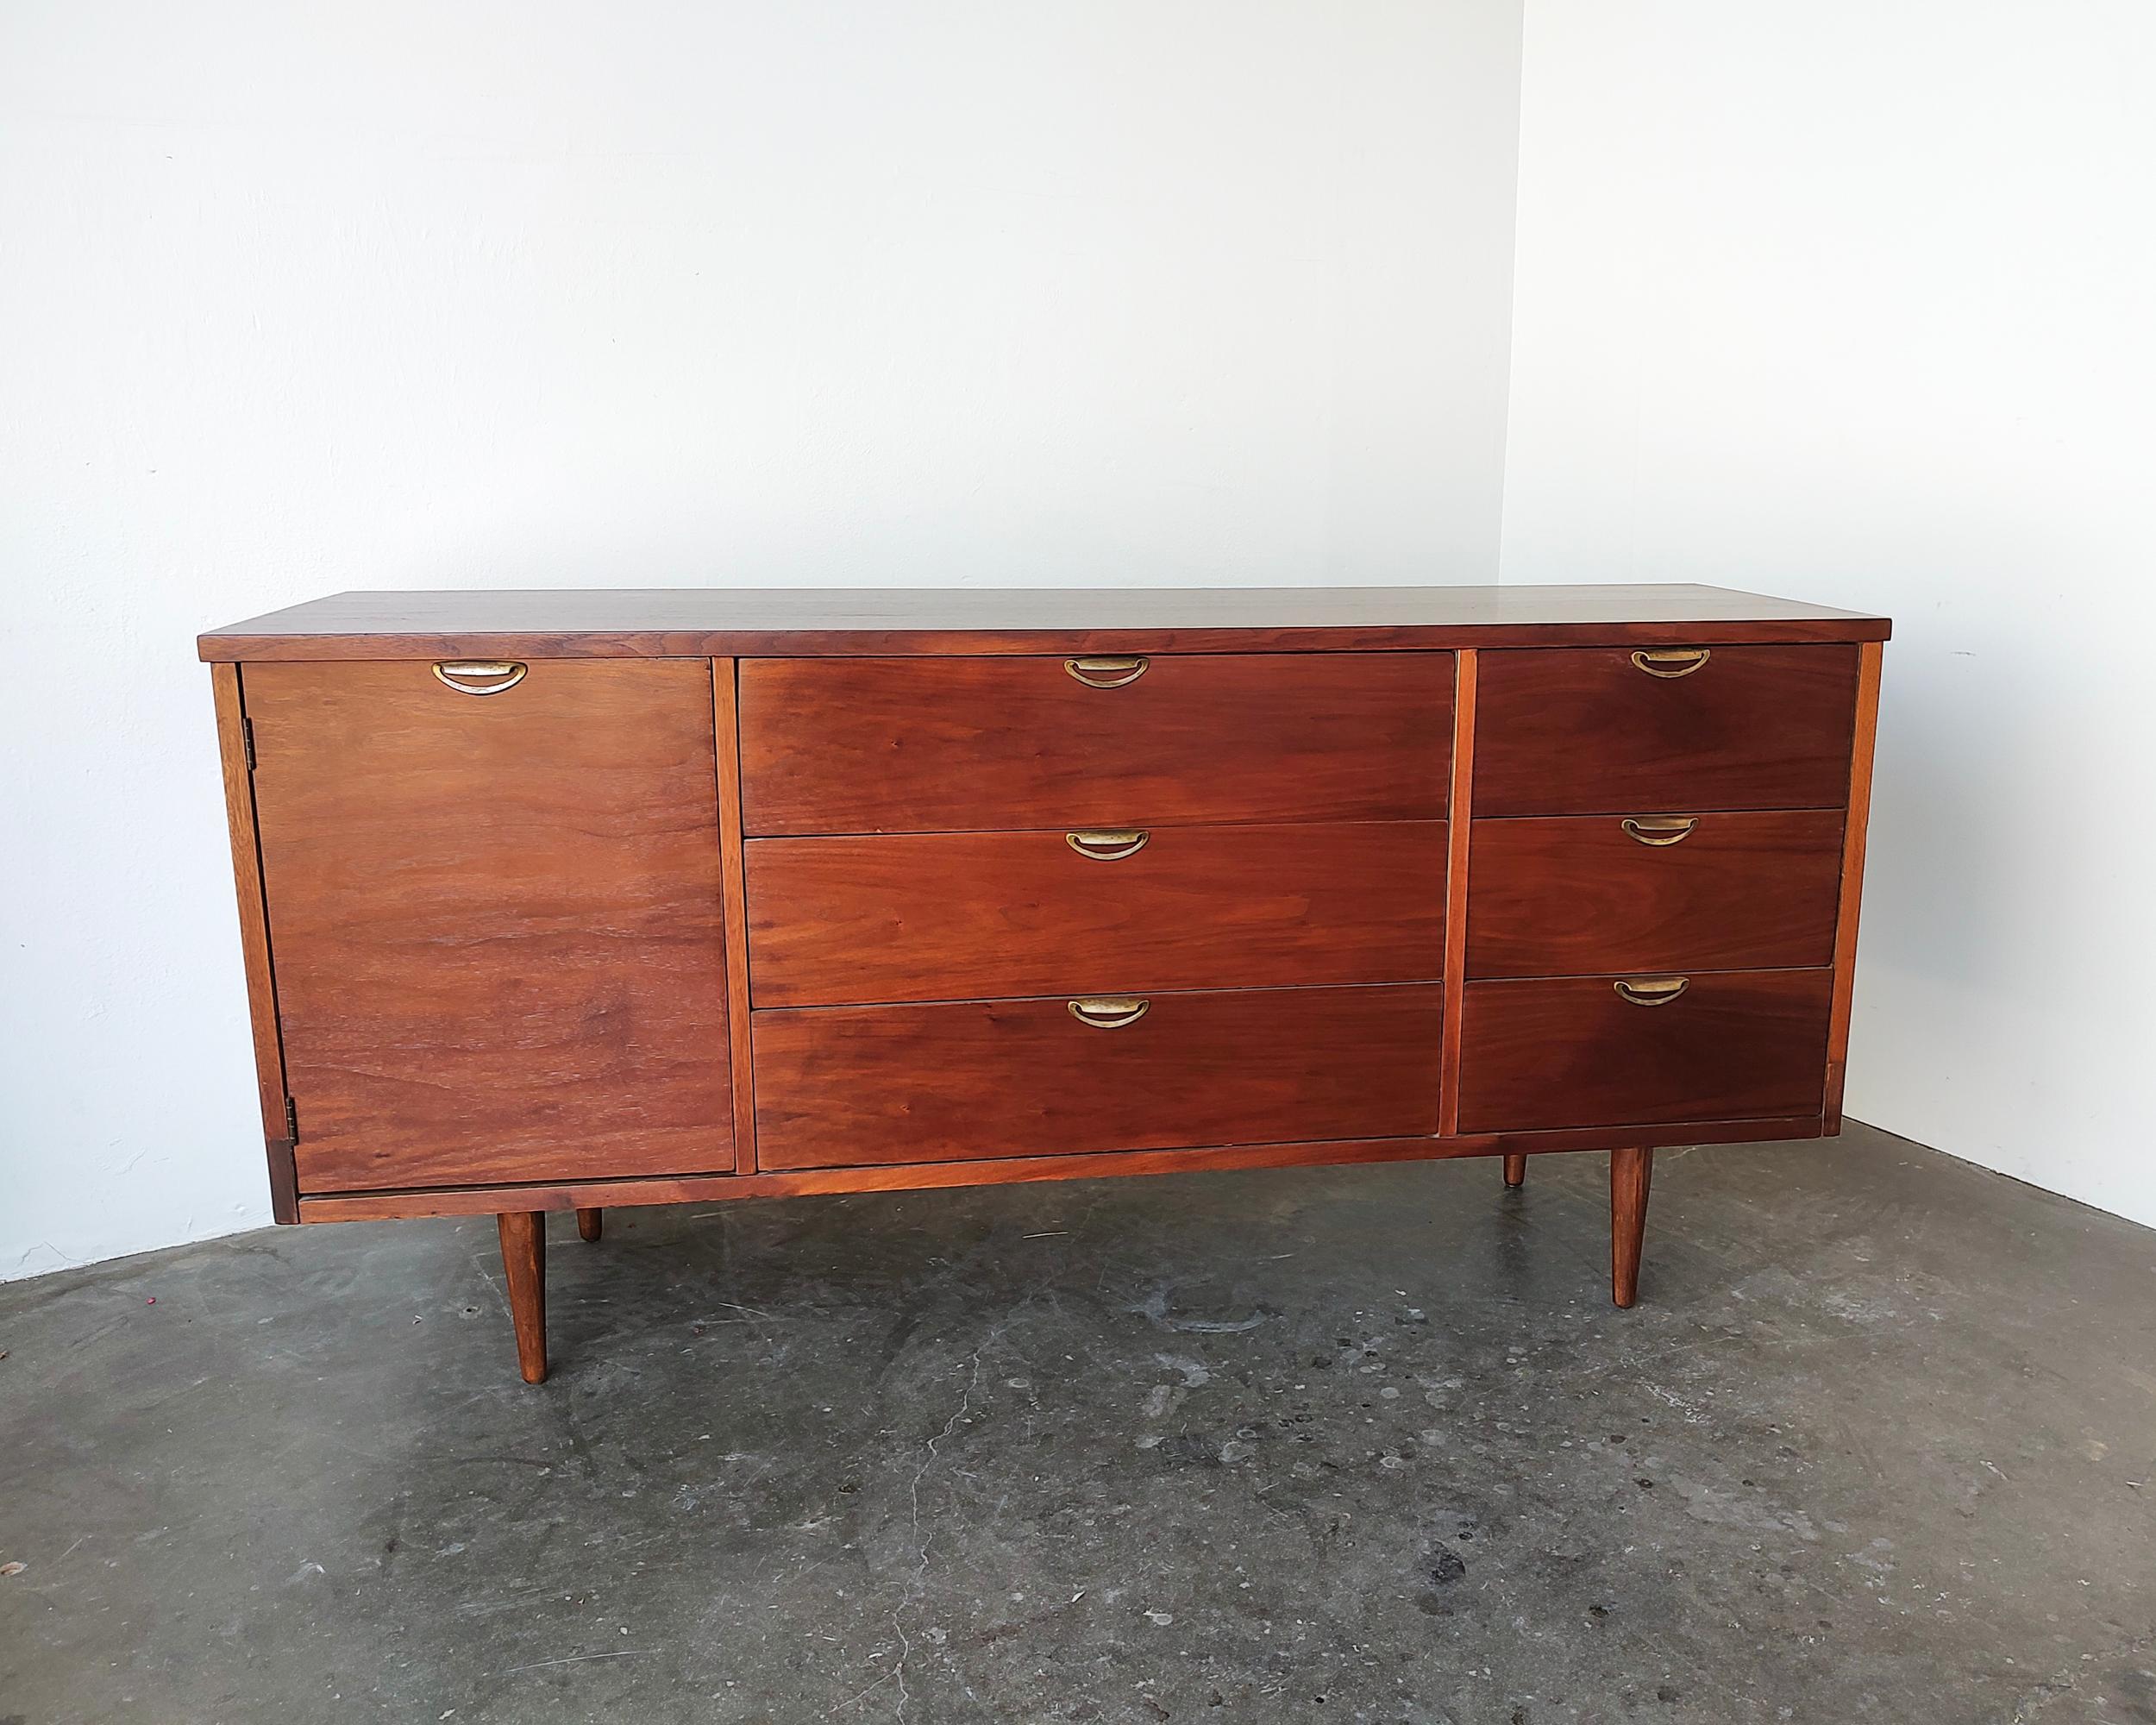 Beautiful restored mid-century modern walnut wood sideboard cabinet by Bassett Furniture Inc. circa 1960s. Six drawers on the right (one with built-in dividers) and cabinet on the left with removeable shelf featuring original patinaed brass pulls.